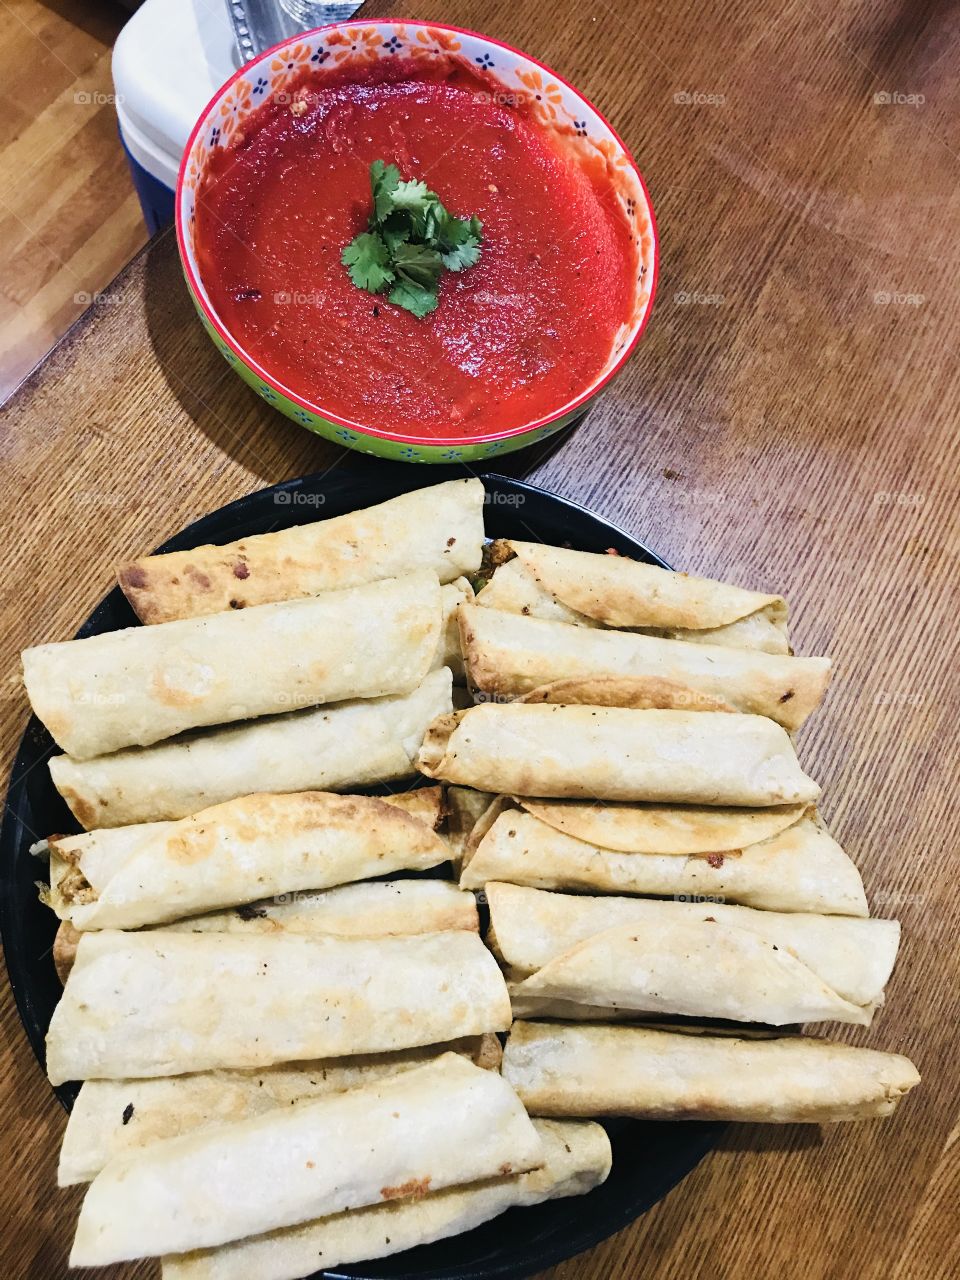 HOMEMADE TAQUITOS and dipping sauce yummy 😋 